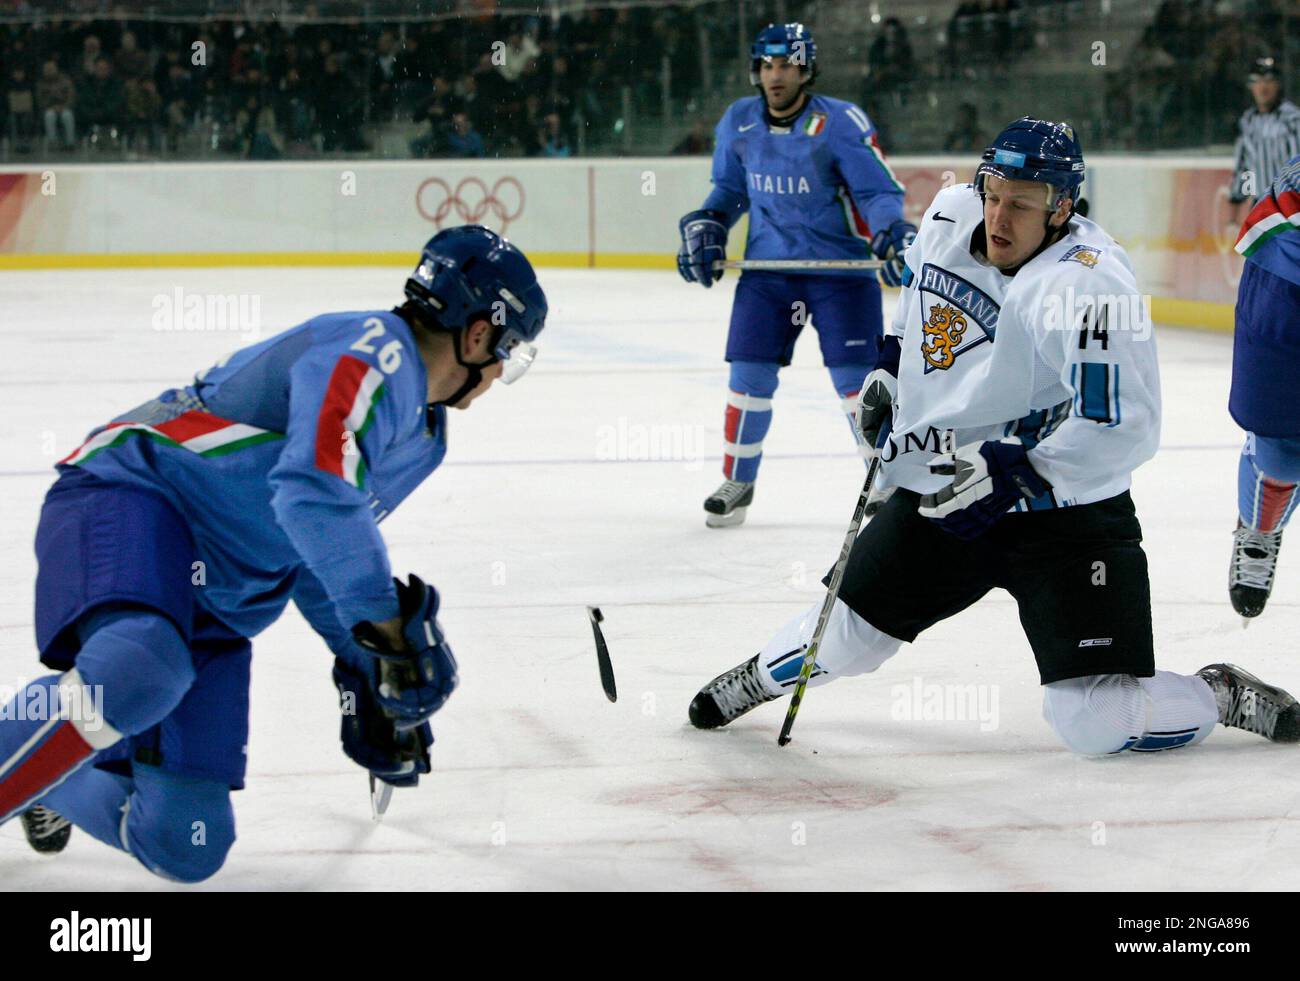 Finlands Niklas Hagman (14), of the NHLs Dallas Stars, breaks his stick shooting as Italys Armin Helfer (26) defends during the second period of a 2006 Winter Olympics mens ice hockey match